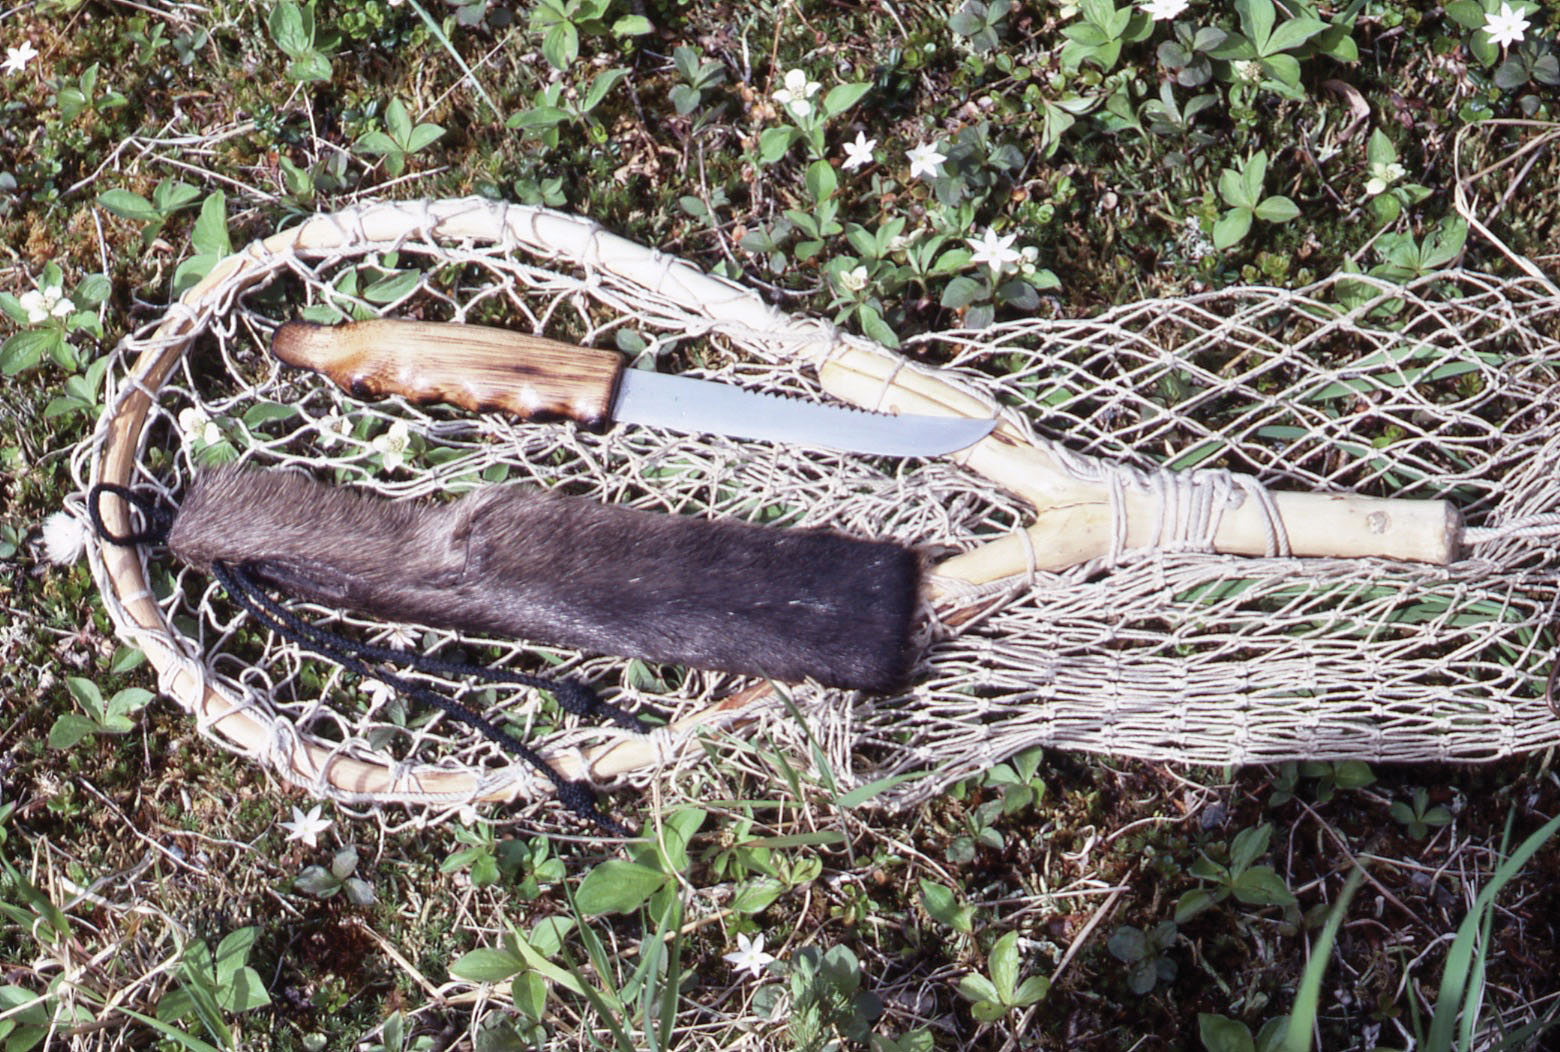 Making spoon lure in a primitive way in a tree 